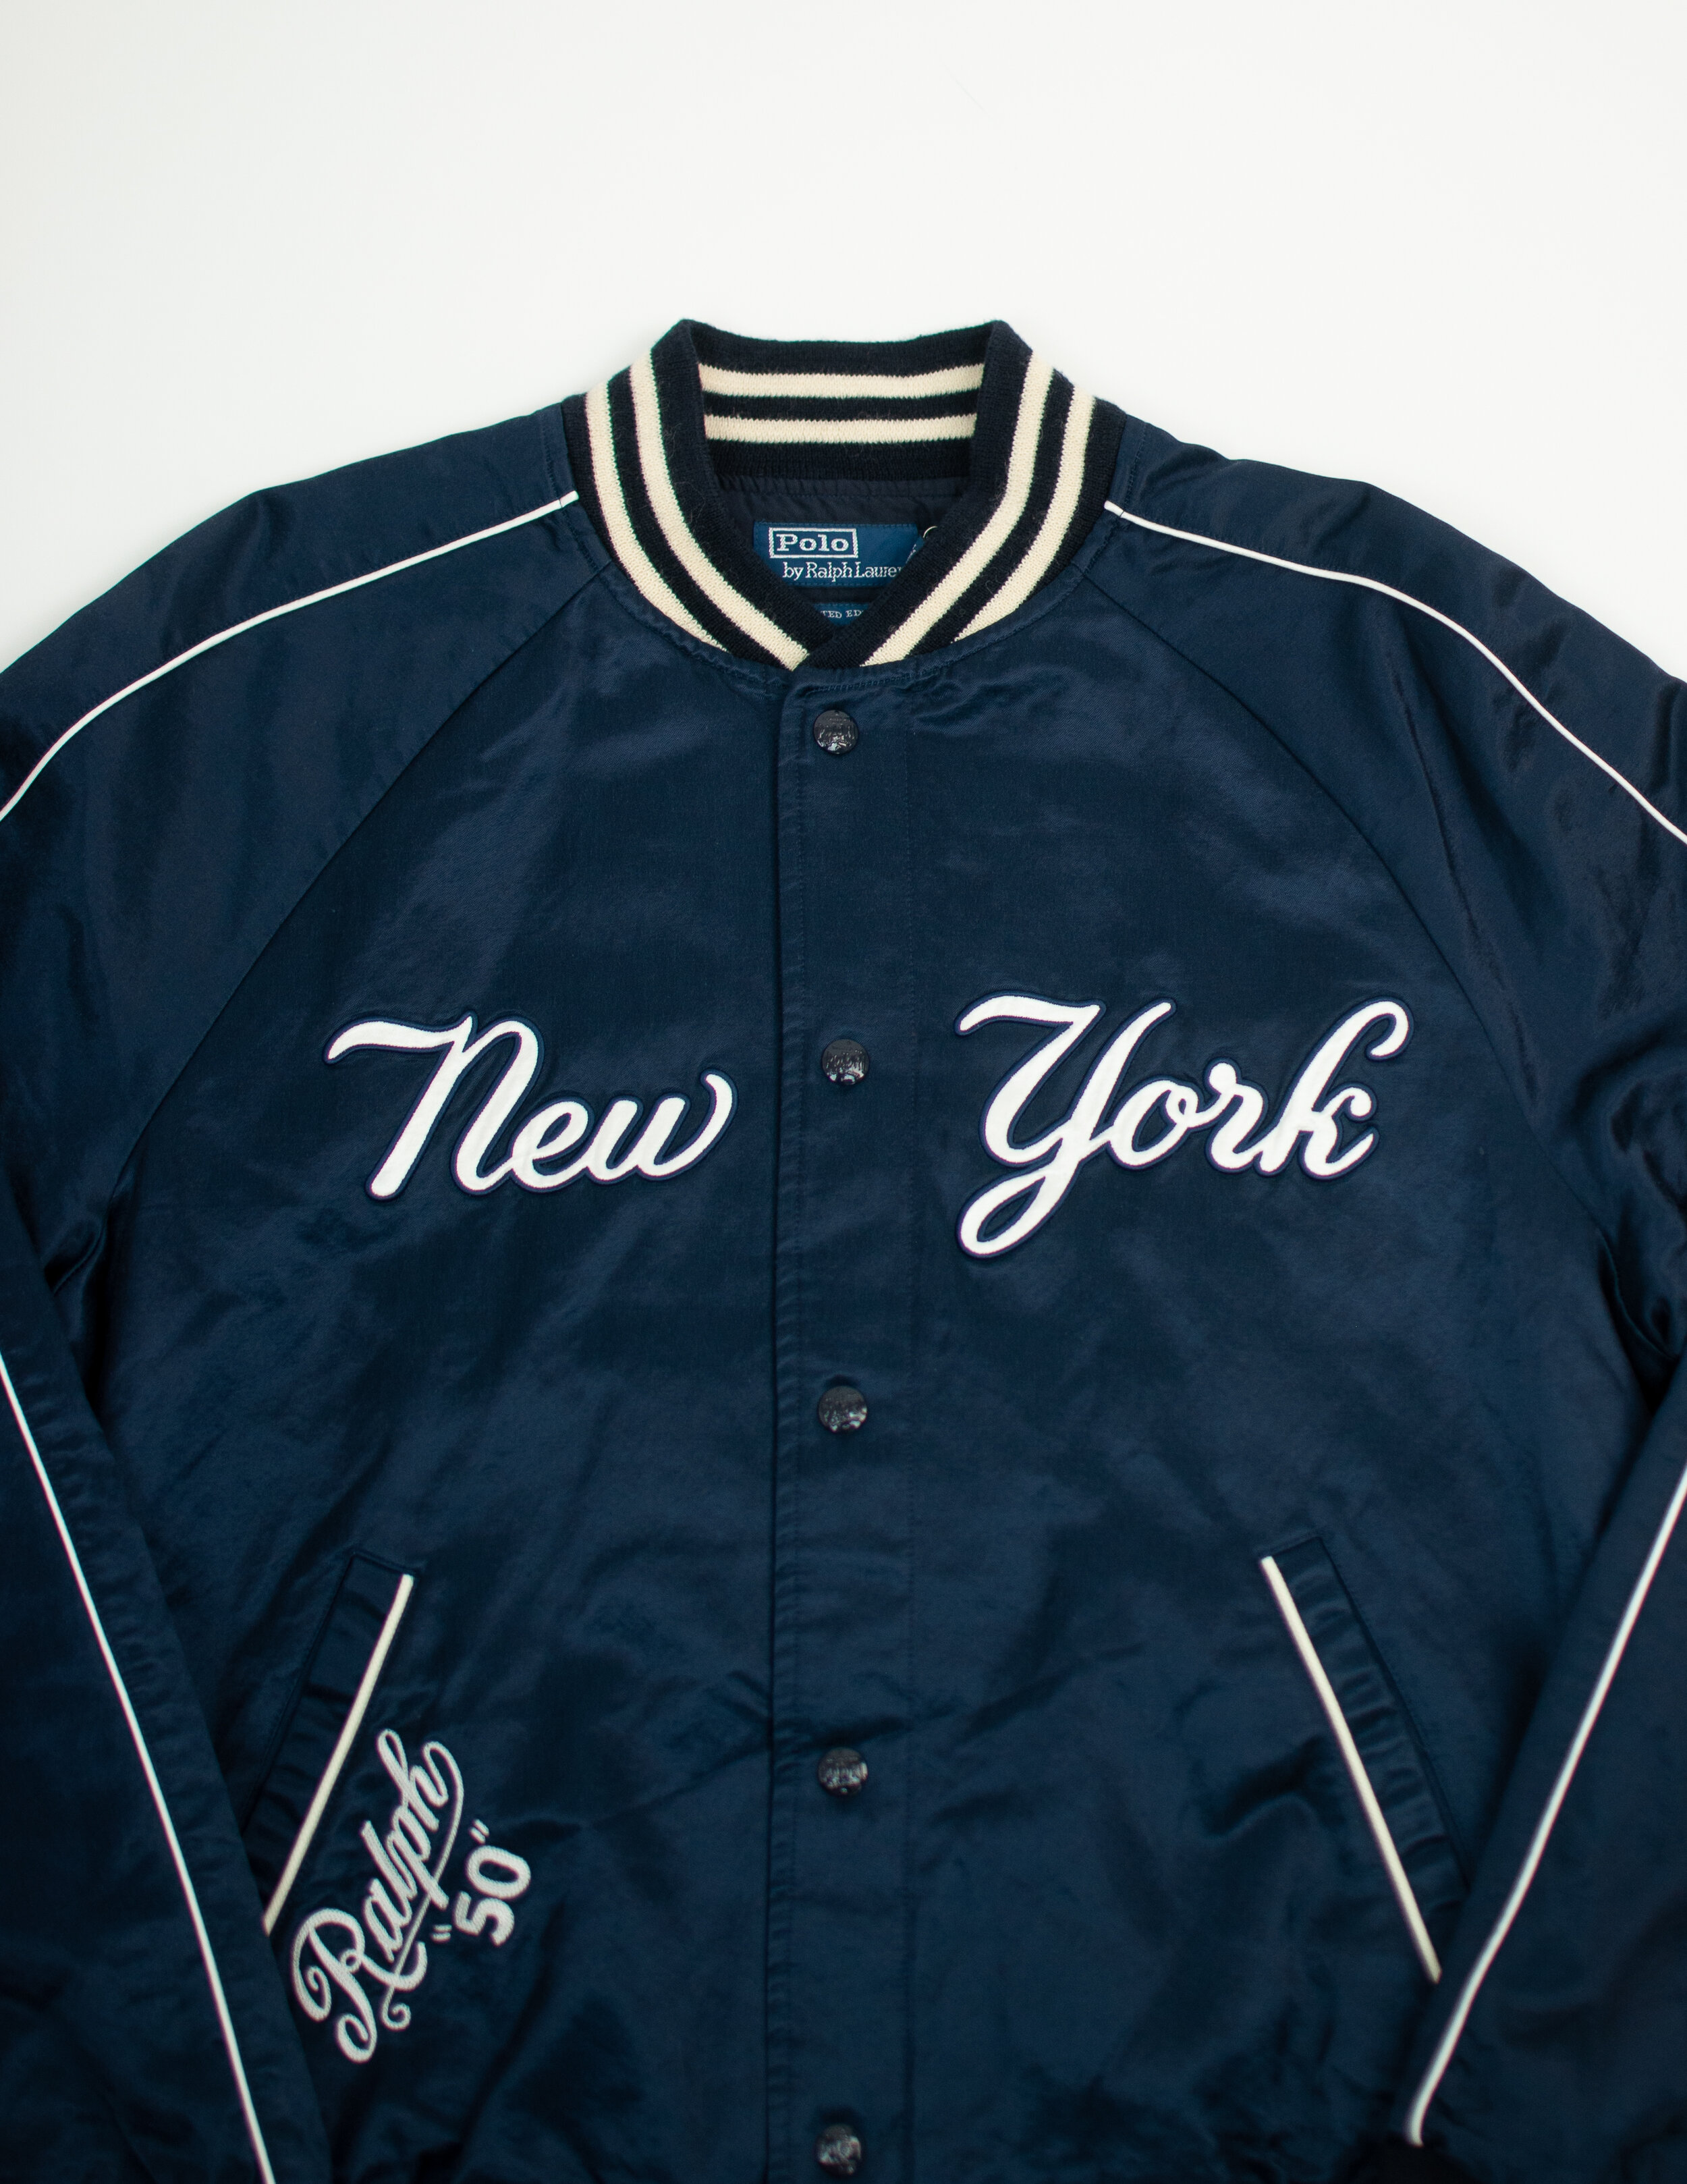 Polo Ralph Lauren x New York Yankees 'Limited Edition/50th